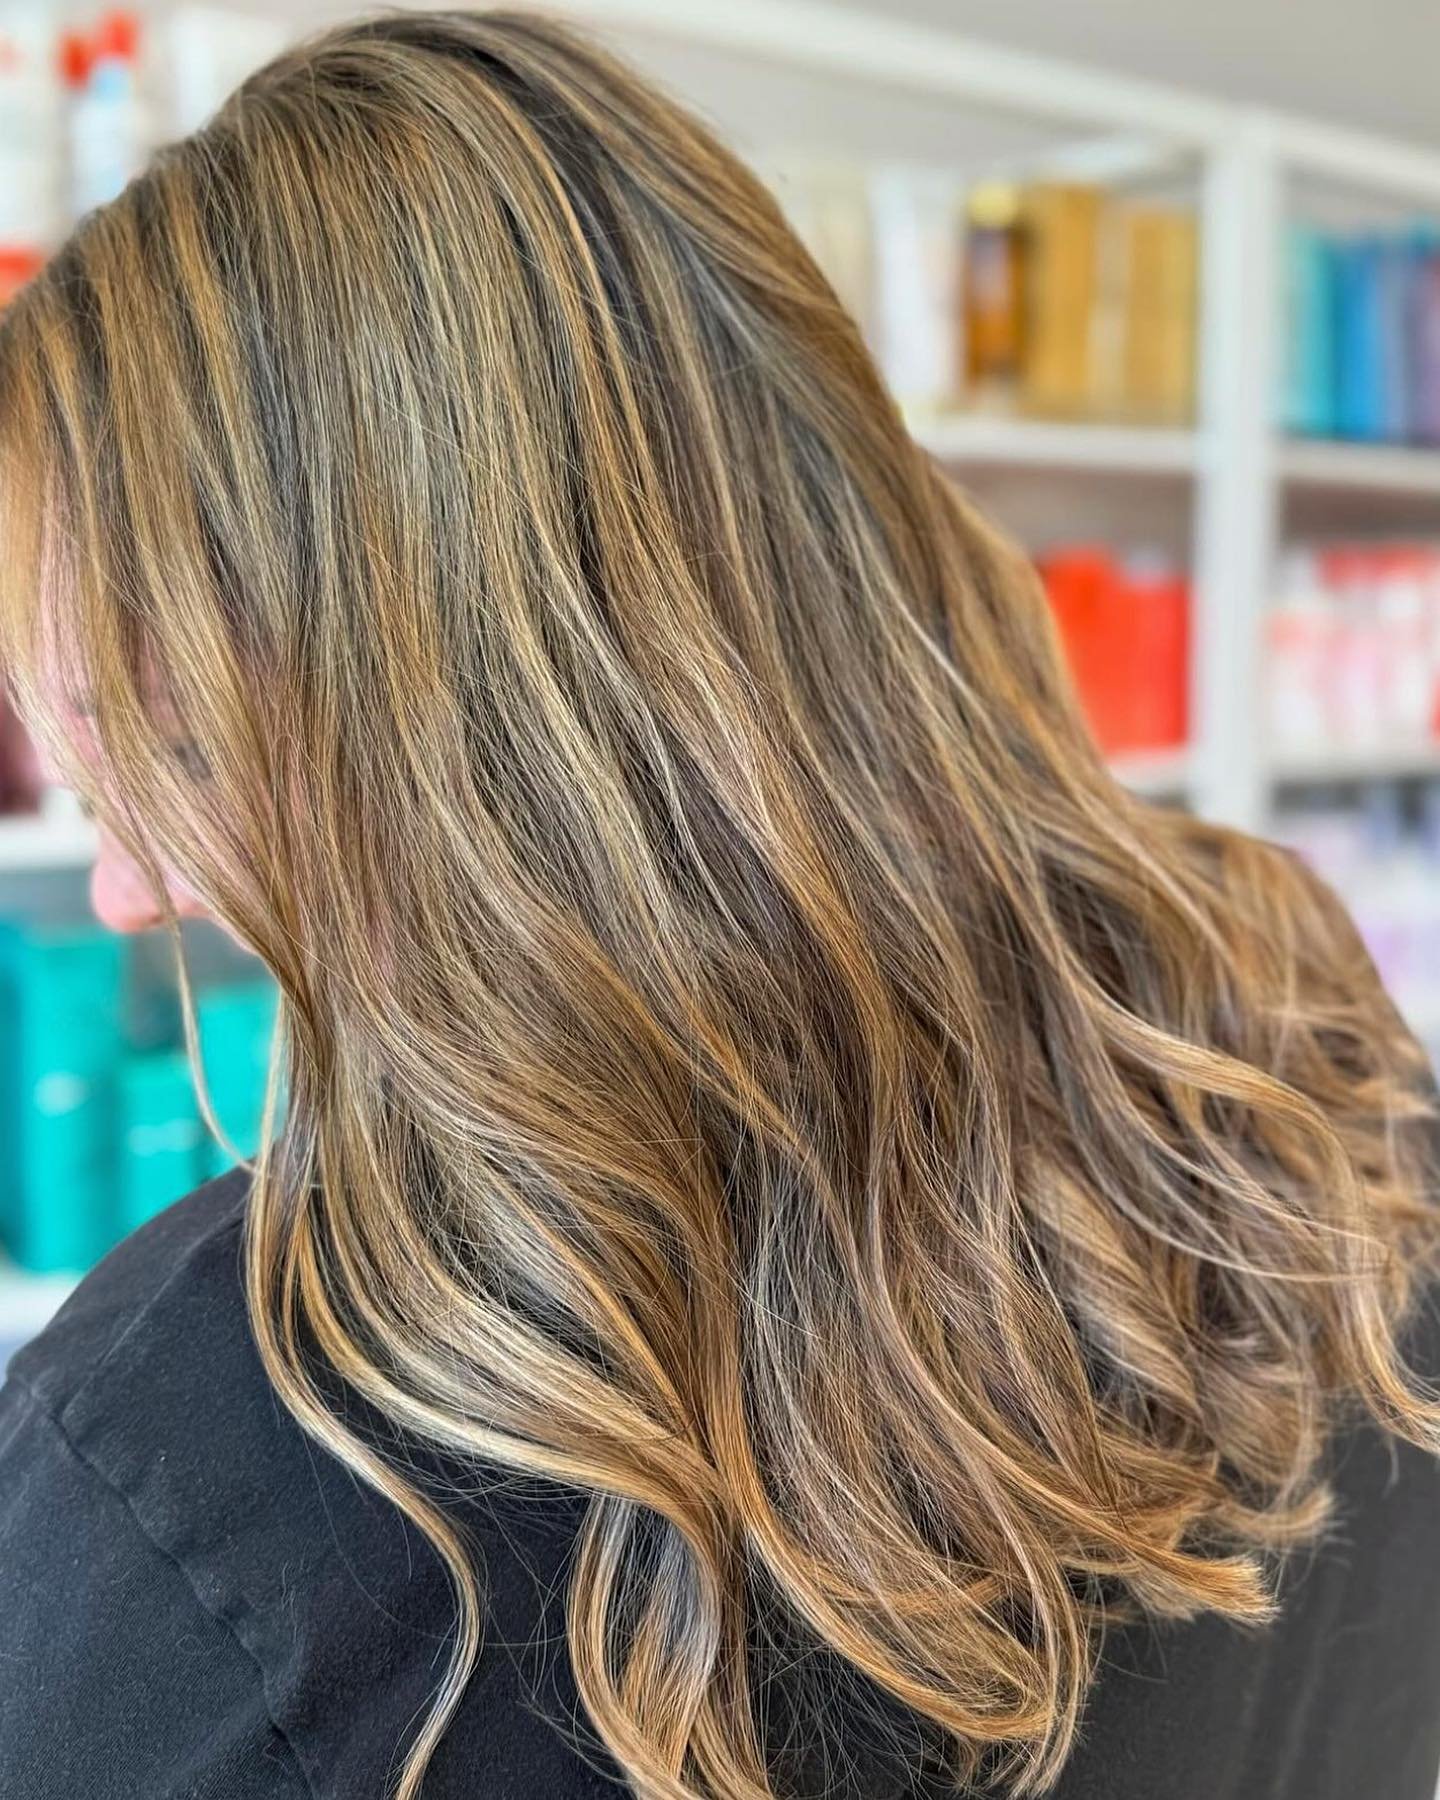 Swipe to see a big transformation 👏🏼

Hair by Alyssa

New color clients redeem a free gift now through May! To make an appointment, give us a call at 517.225.5958 or book online at district308.com/book

.
.
.
.
.
Howell, Brighton, Pinckney, Hartlan